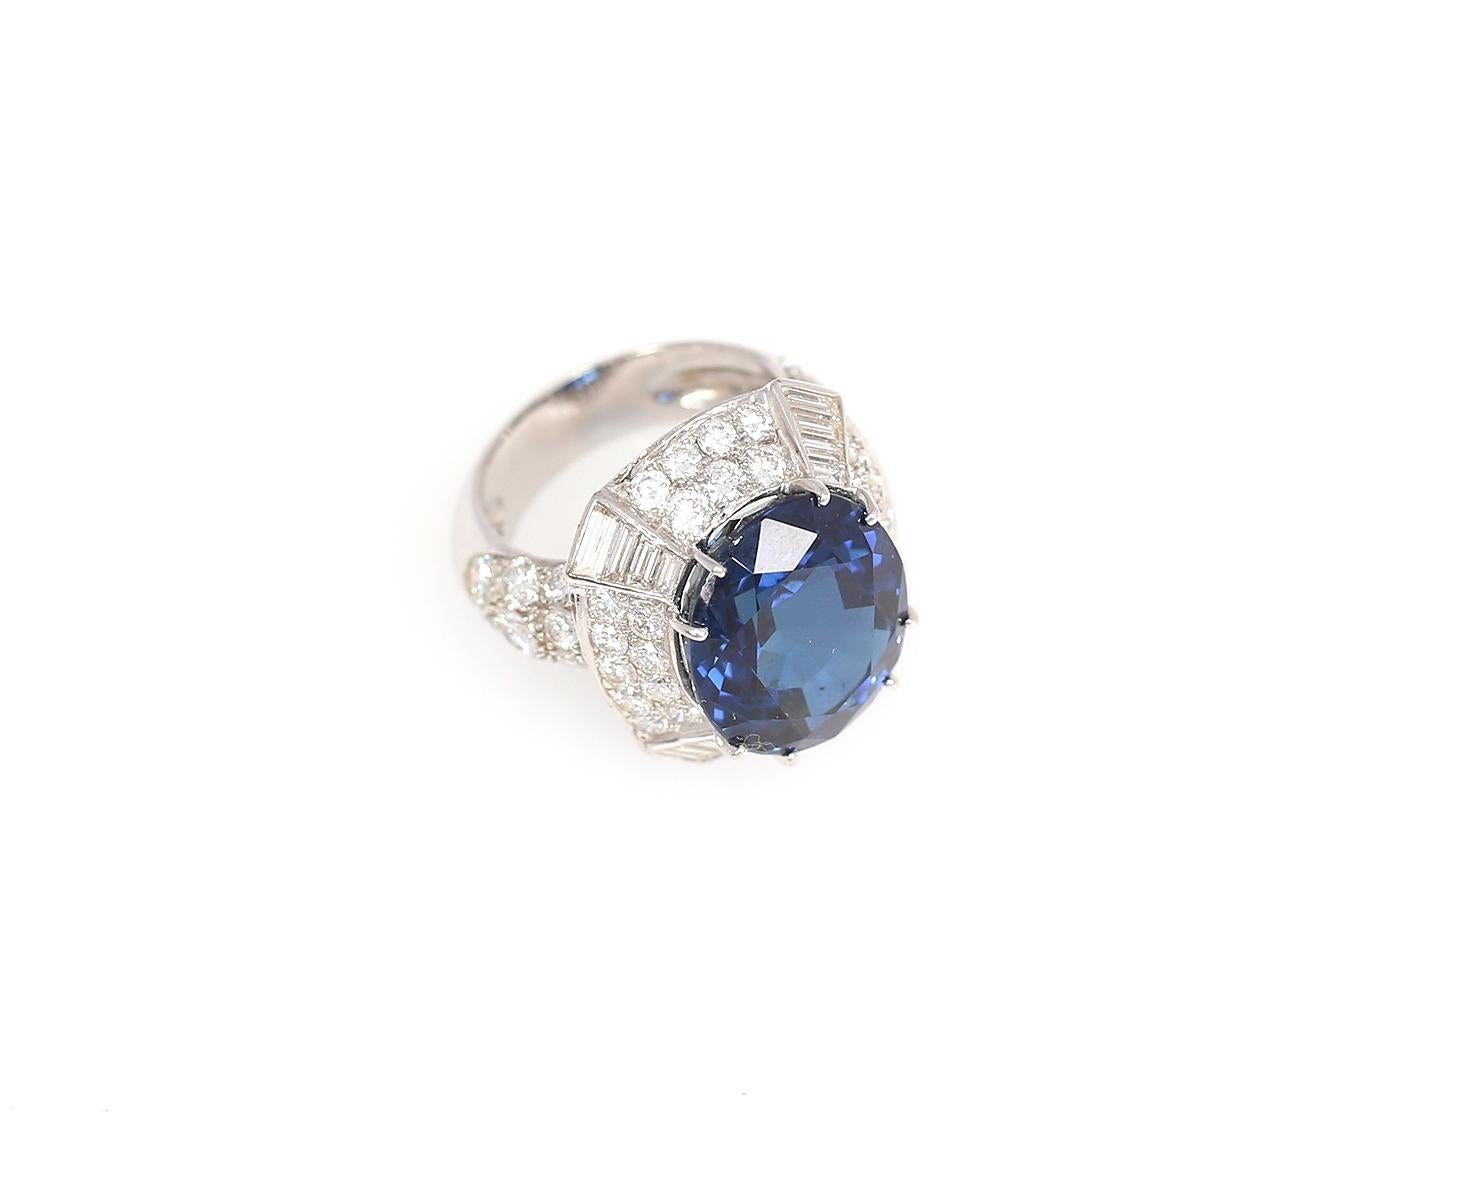 14.6 Ct Natural Sapphire Certified Diamond Ring 18K Gold, 1998 For Sale 3